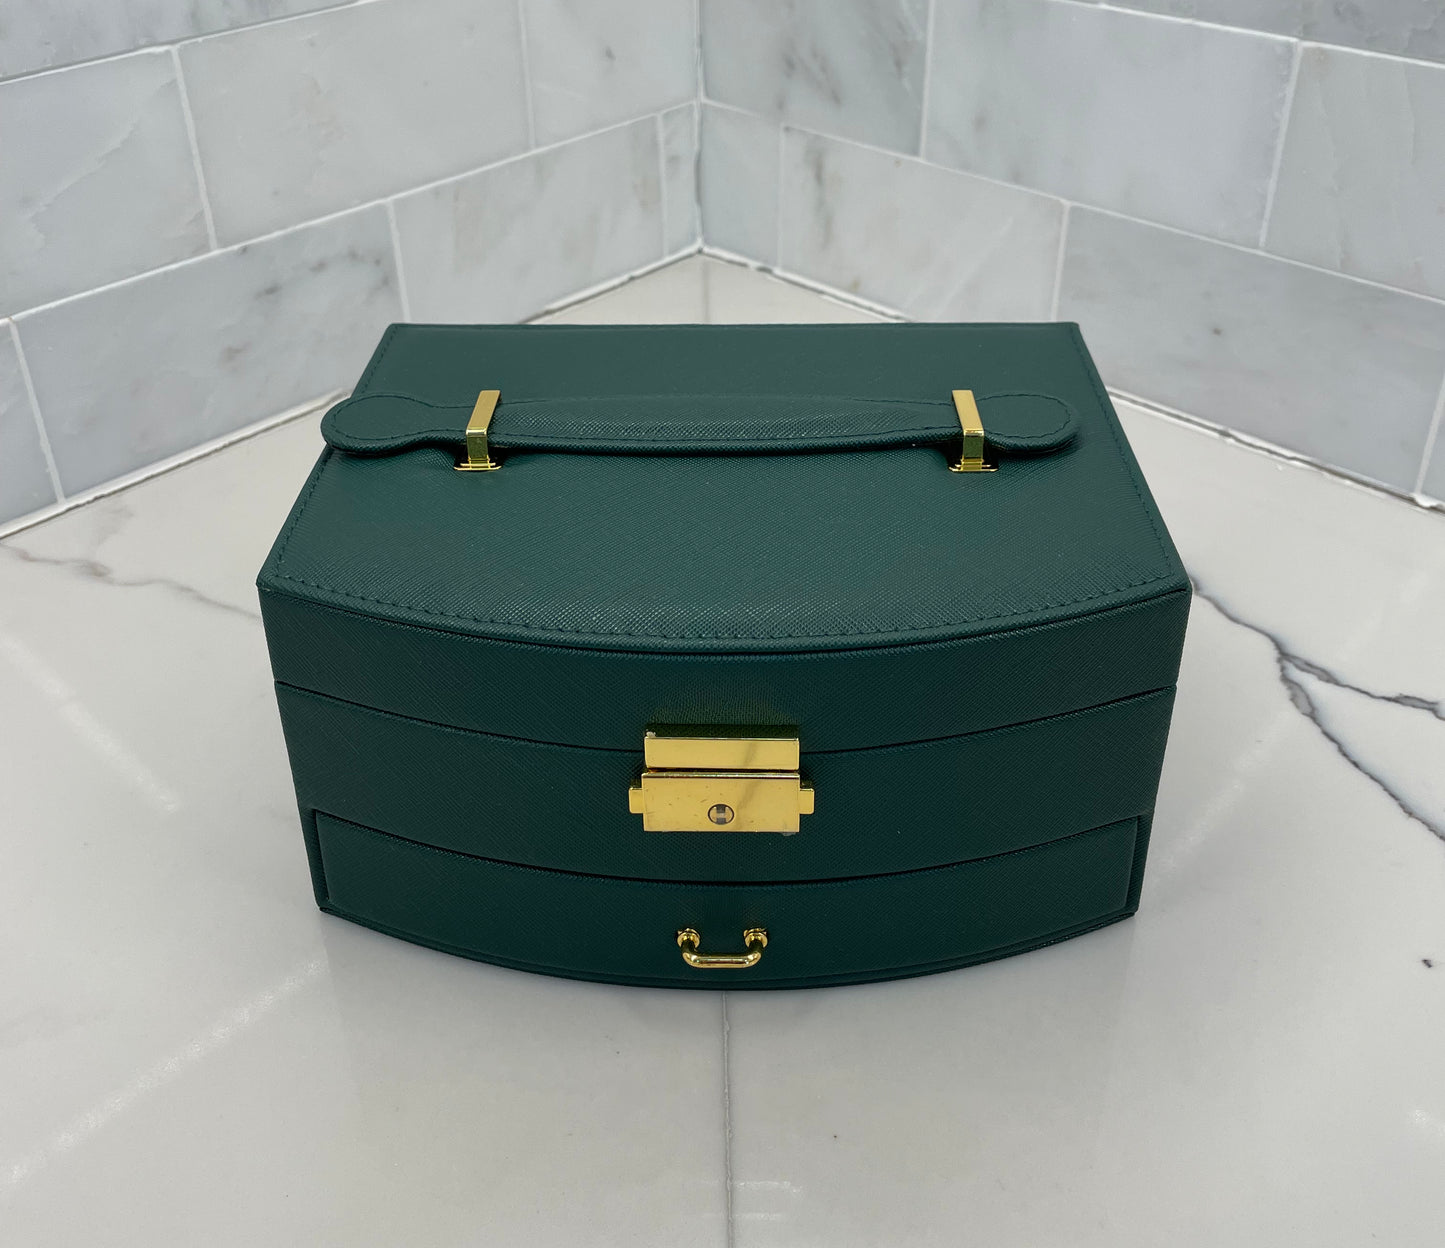 Green Personalized Large Jewelry Box with Drawer, Carrying Handle, and a Lock and Key